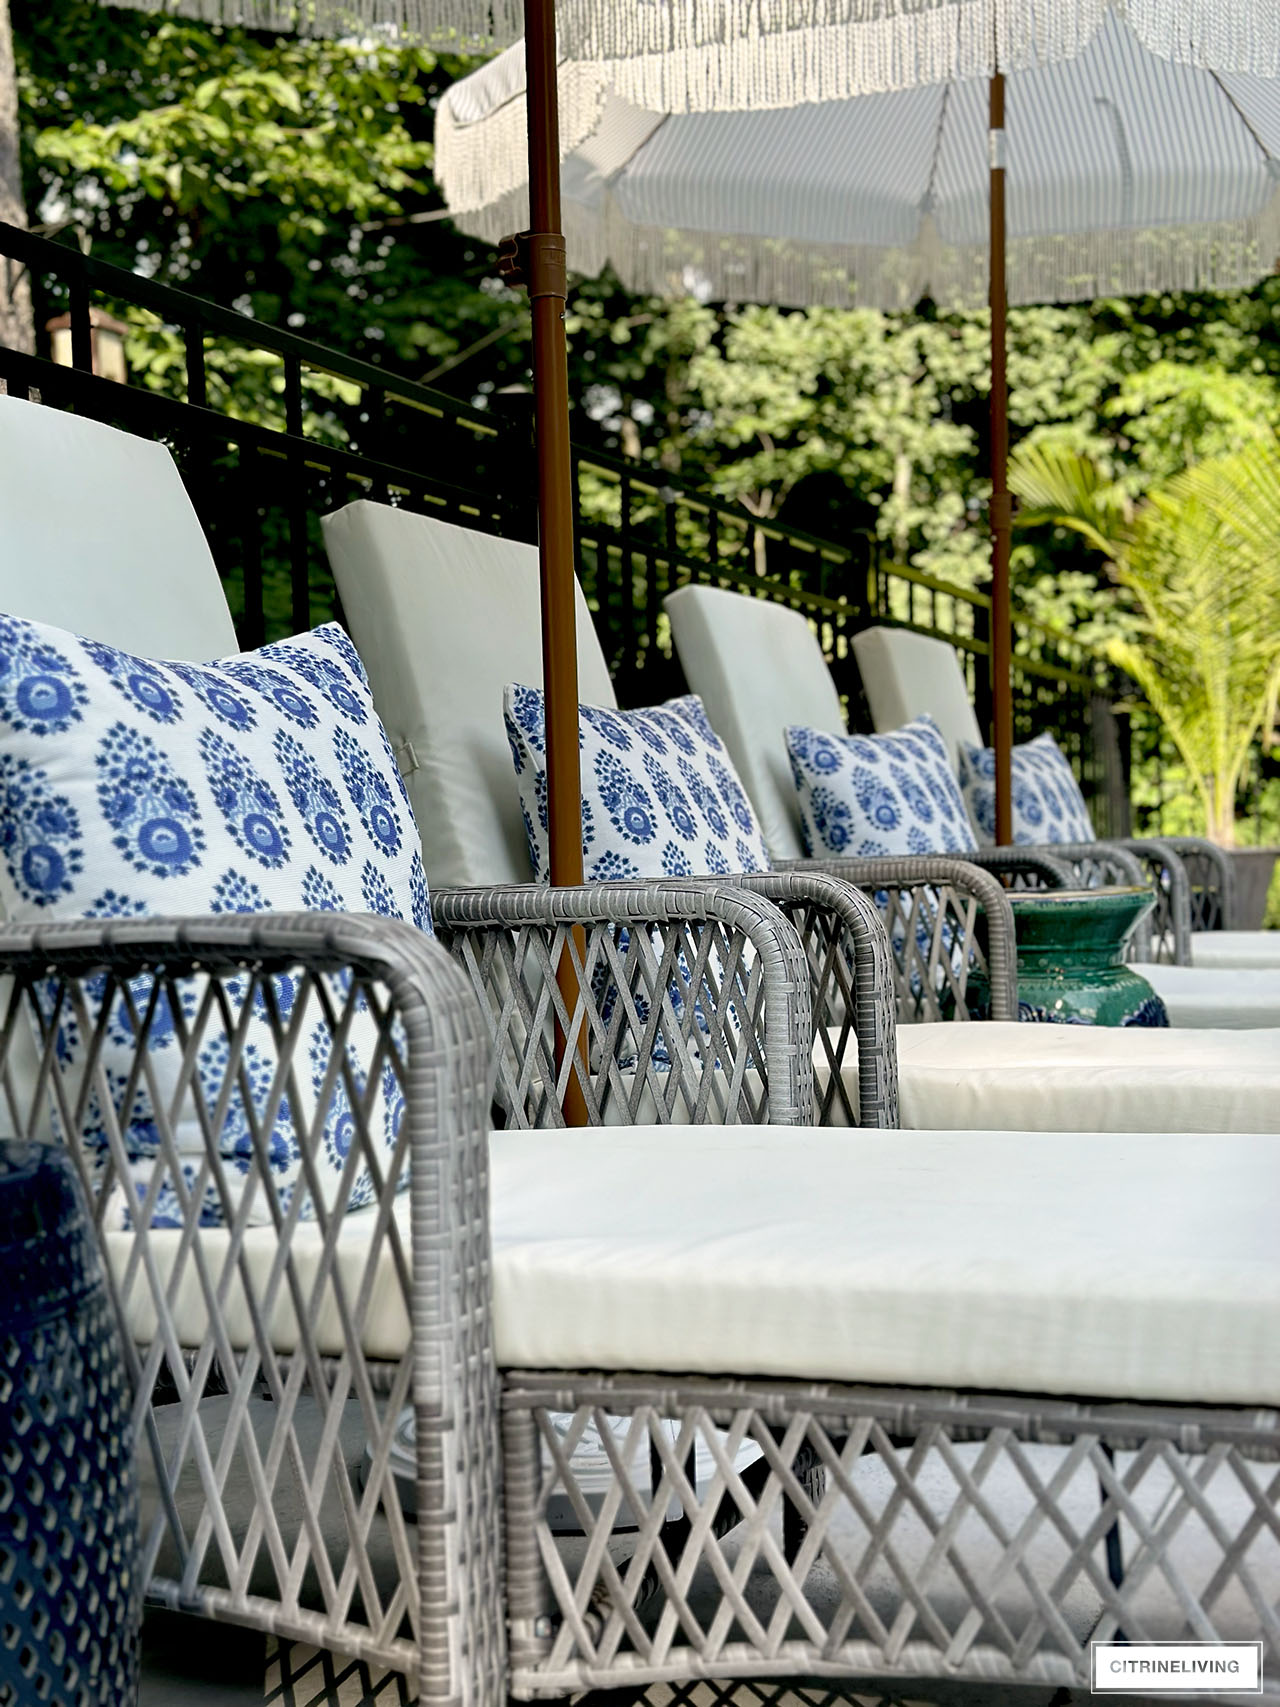 Pool loungers and batik print pillows in blue and white.